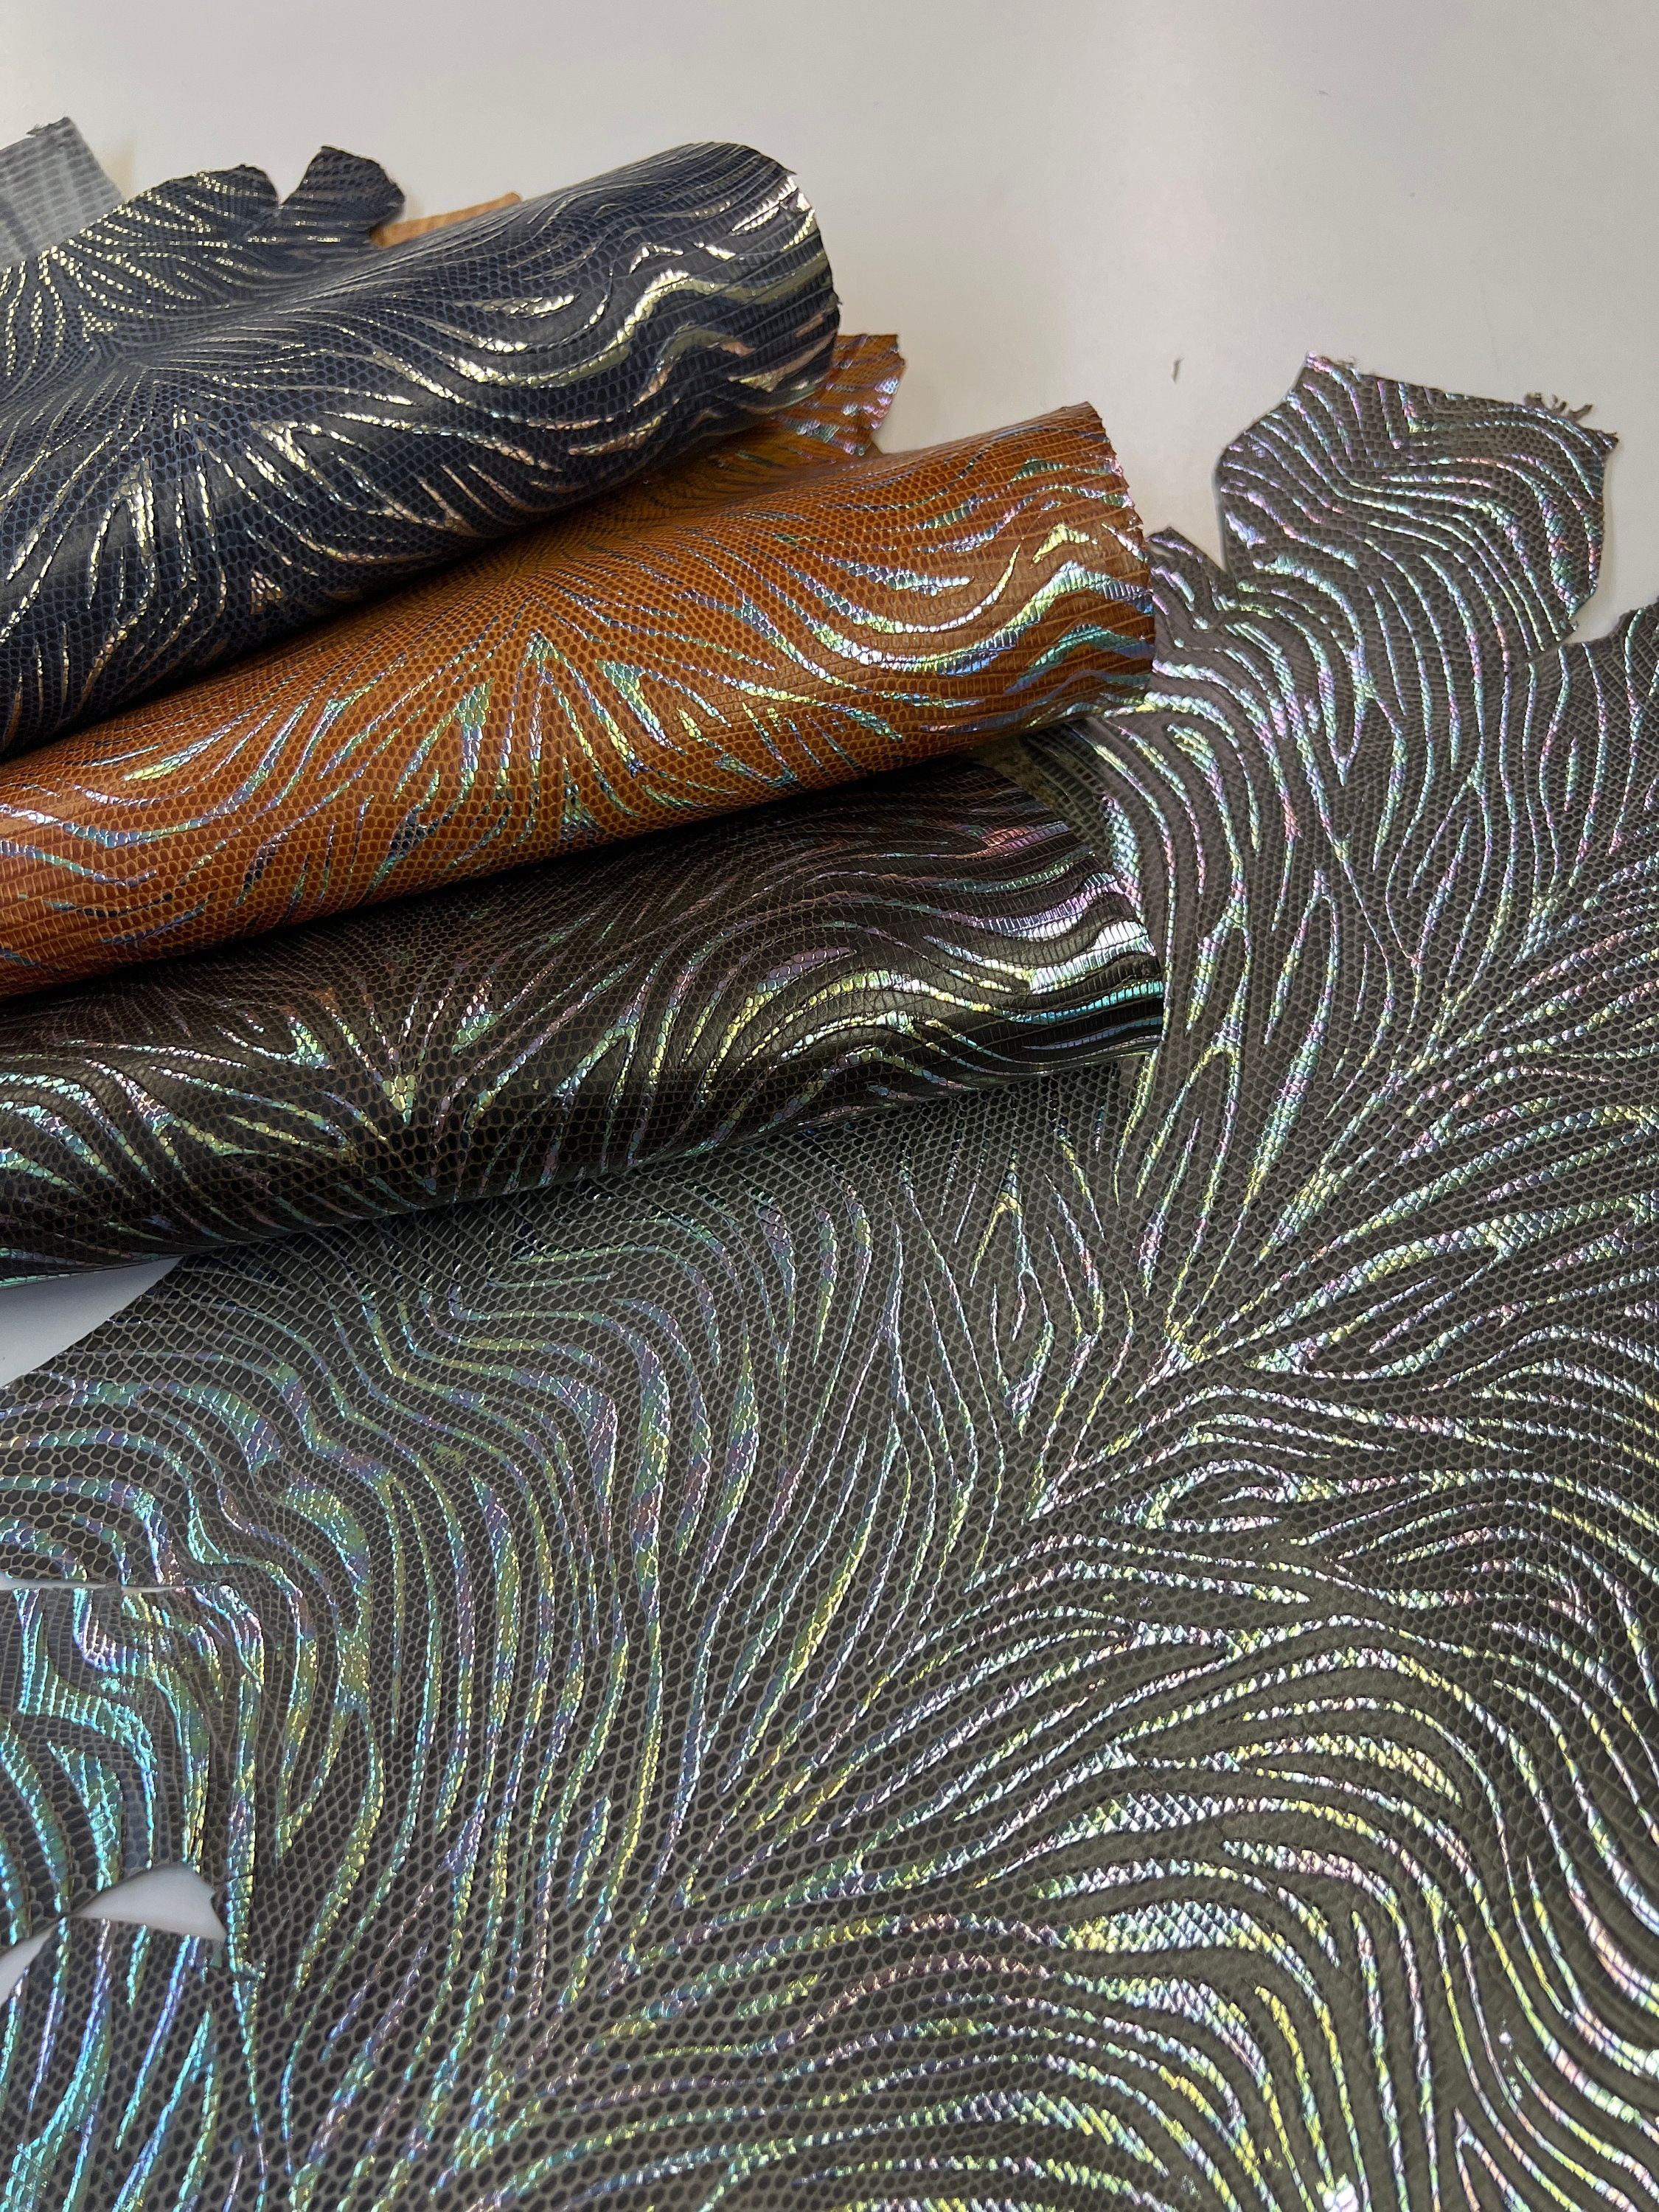 Lizard Printed Leather Remnants: Made in Italy